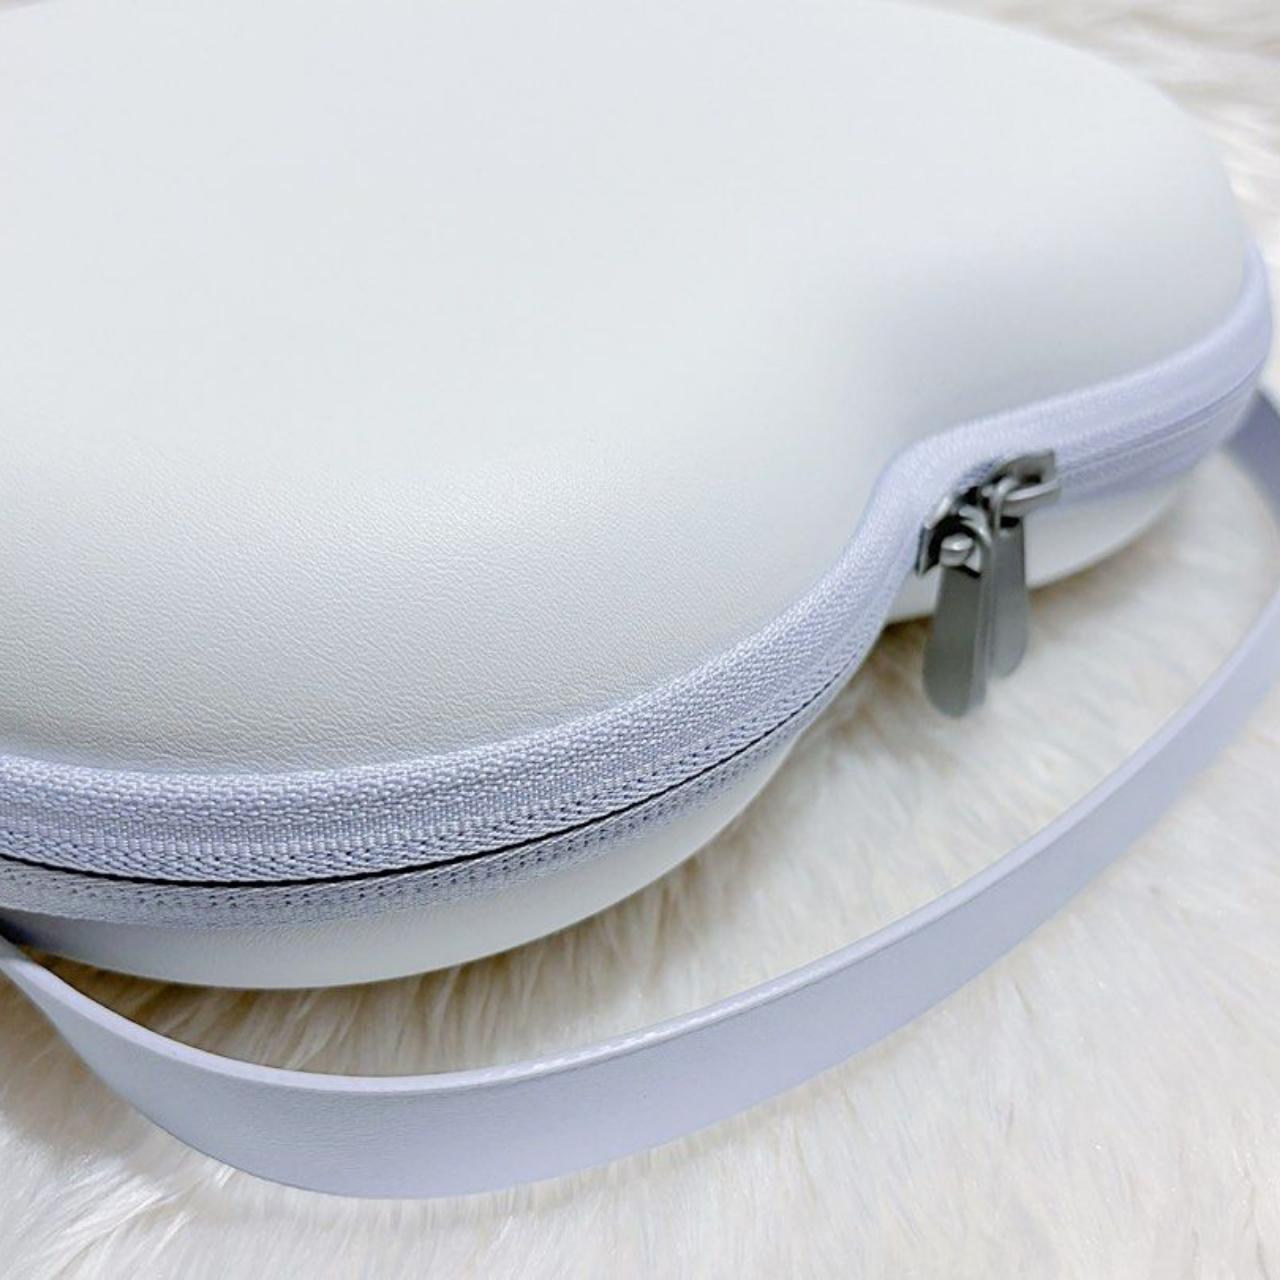 Logitech G Carry Case for G735 Headset & G705 Mouse in White